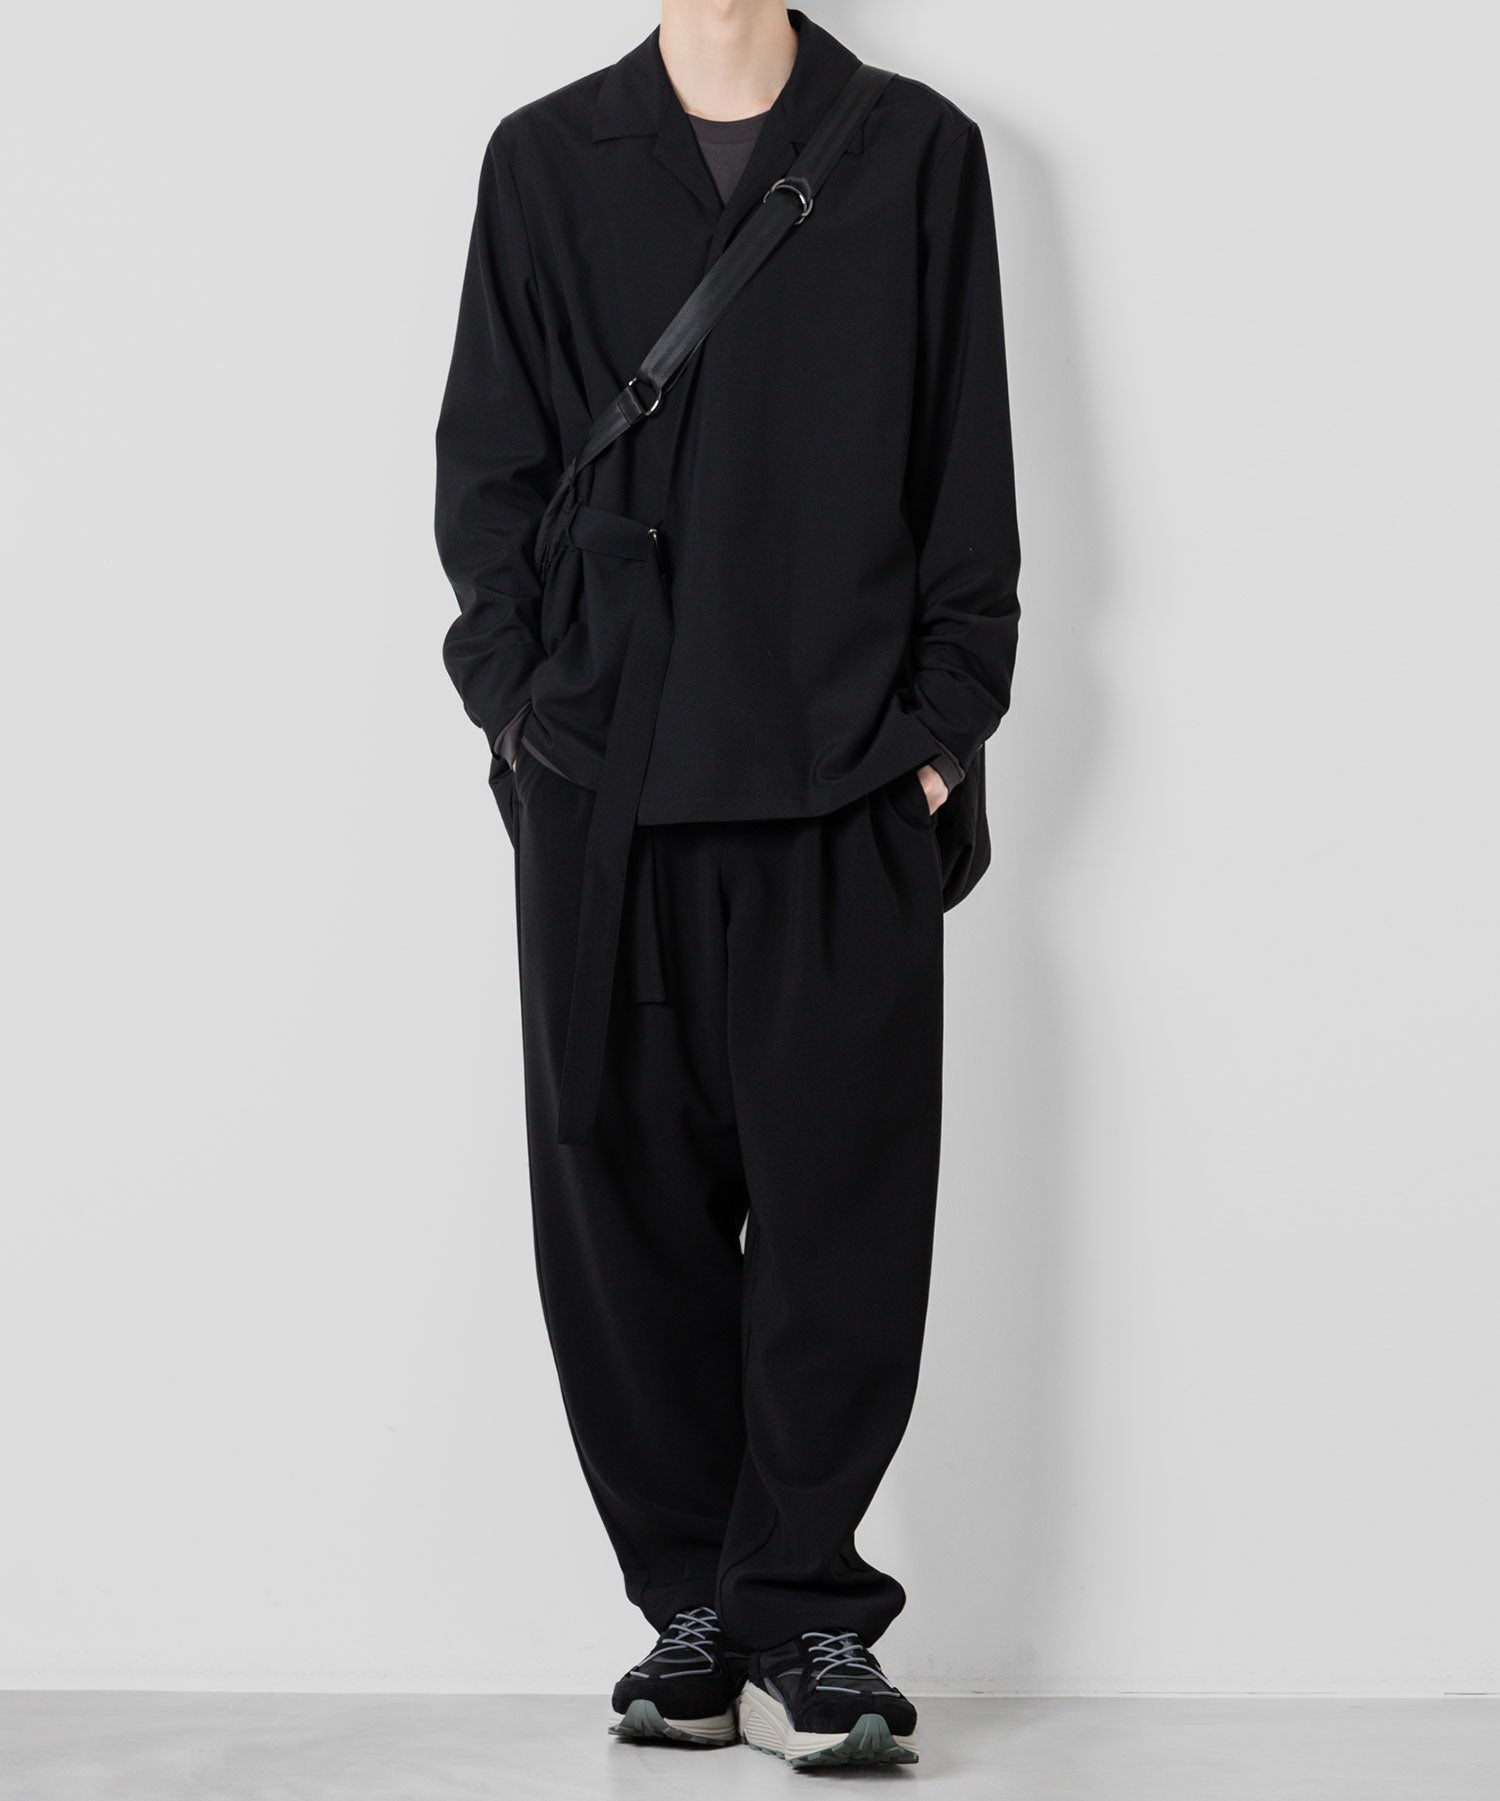 【ATTACHMENT】ATTACHMENT アタッチメントのWO TROPICAL BELTED L/S SHIRT - BLACK 公式通販サイトsession福岡セレクトショップ